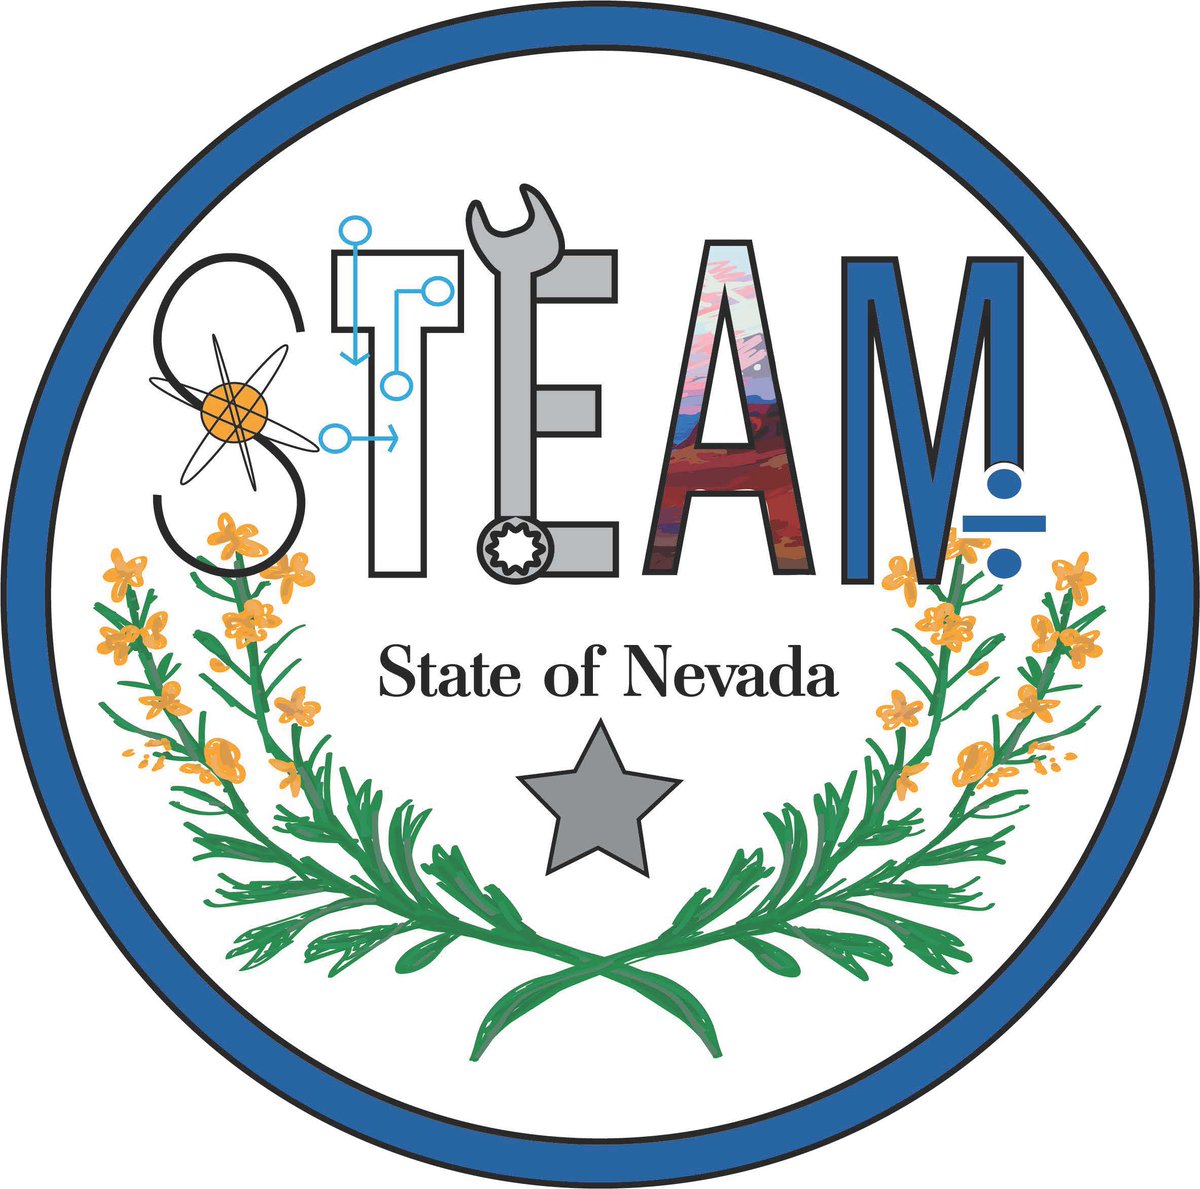 It was my pleasure to partner with @SciNVtech to recognize our STEM and STEAM Seal designers this morning - Chanel Koh from @WCTA_social + Korin Sjostrom from LV Academy of the Arts. This artwork was chosen from over 50 outstanding entries! #STEM #STEAM #NVed @ClarkCountySch